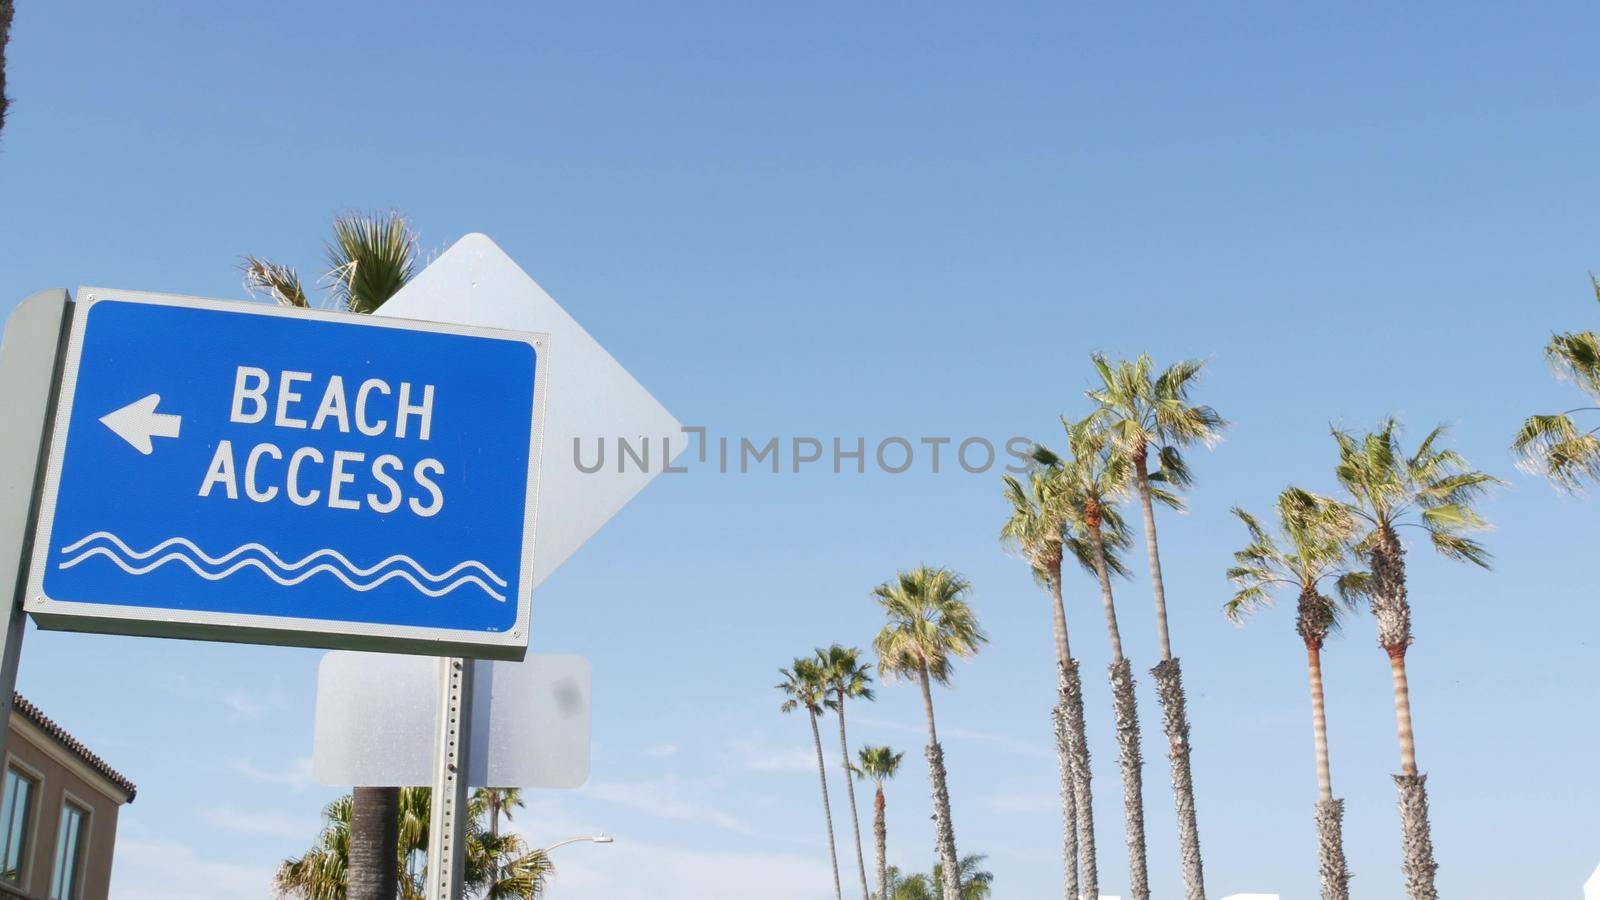 Beach sign and palms in sunny California, USA. Palm trees and seaside signpost. Oceanside pacific tourist resort aesthetic. Symbol of travel holidays and summertime vacations. Beachfront promenade.